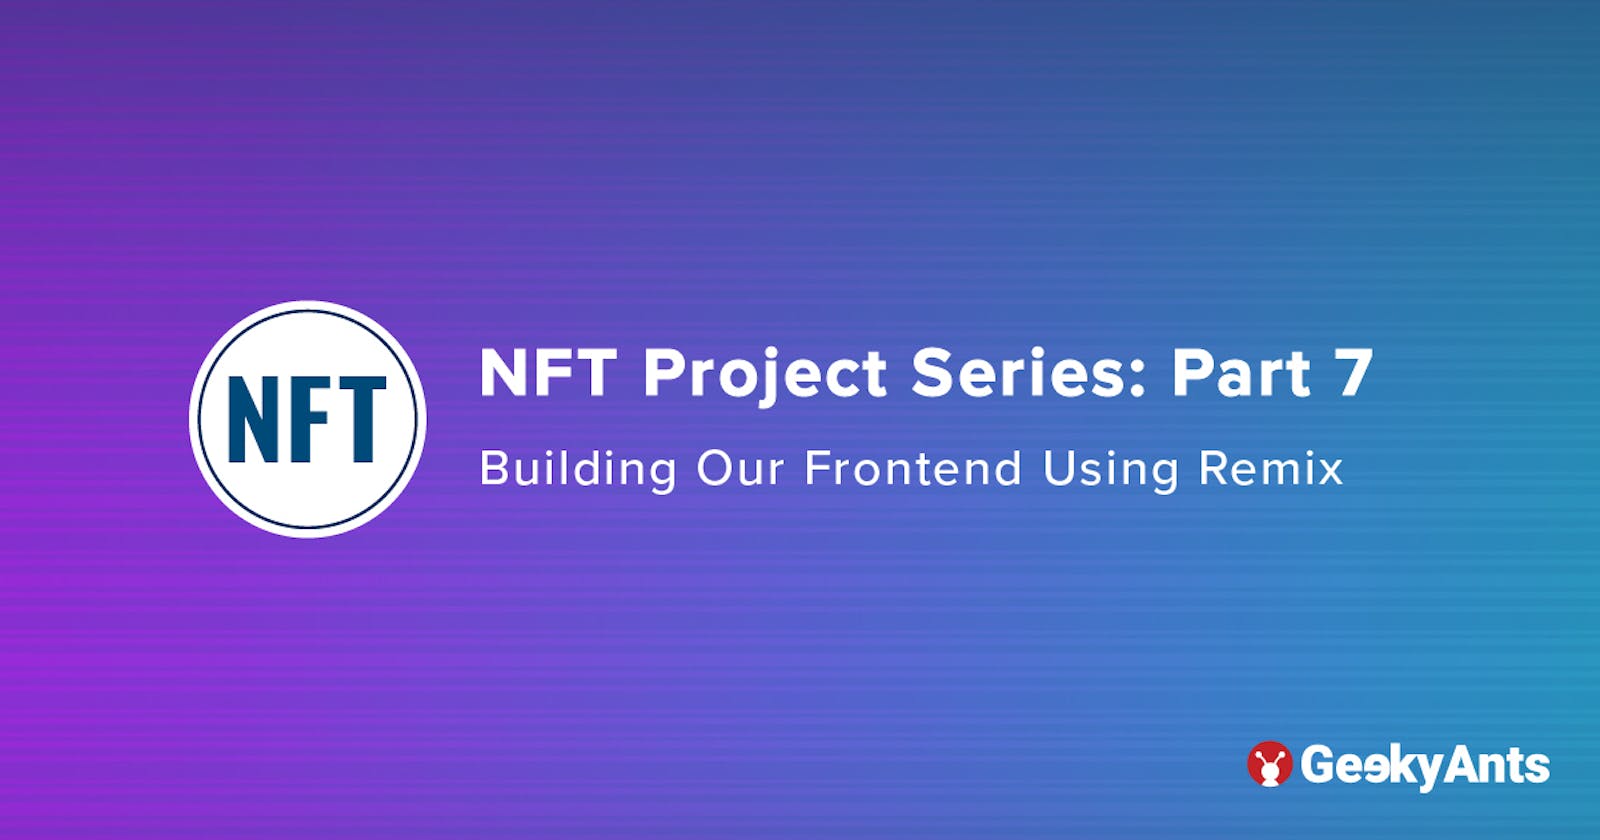 NFT Project Series Part 7: Building Our Frontend Using Remix